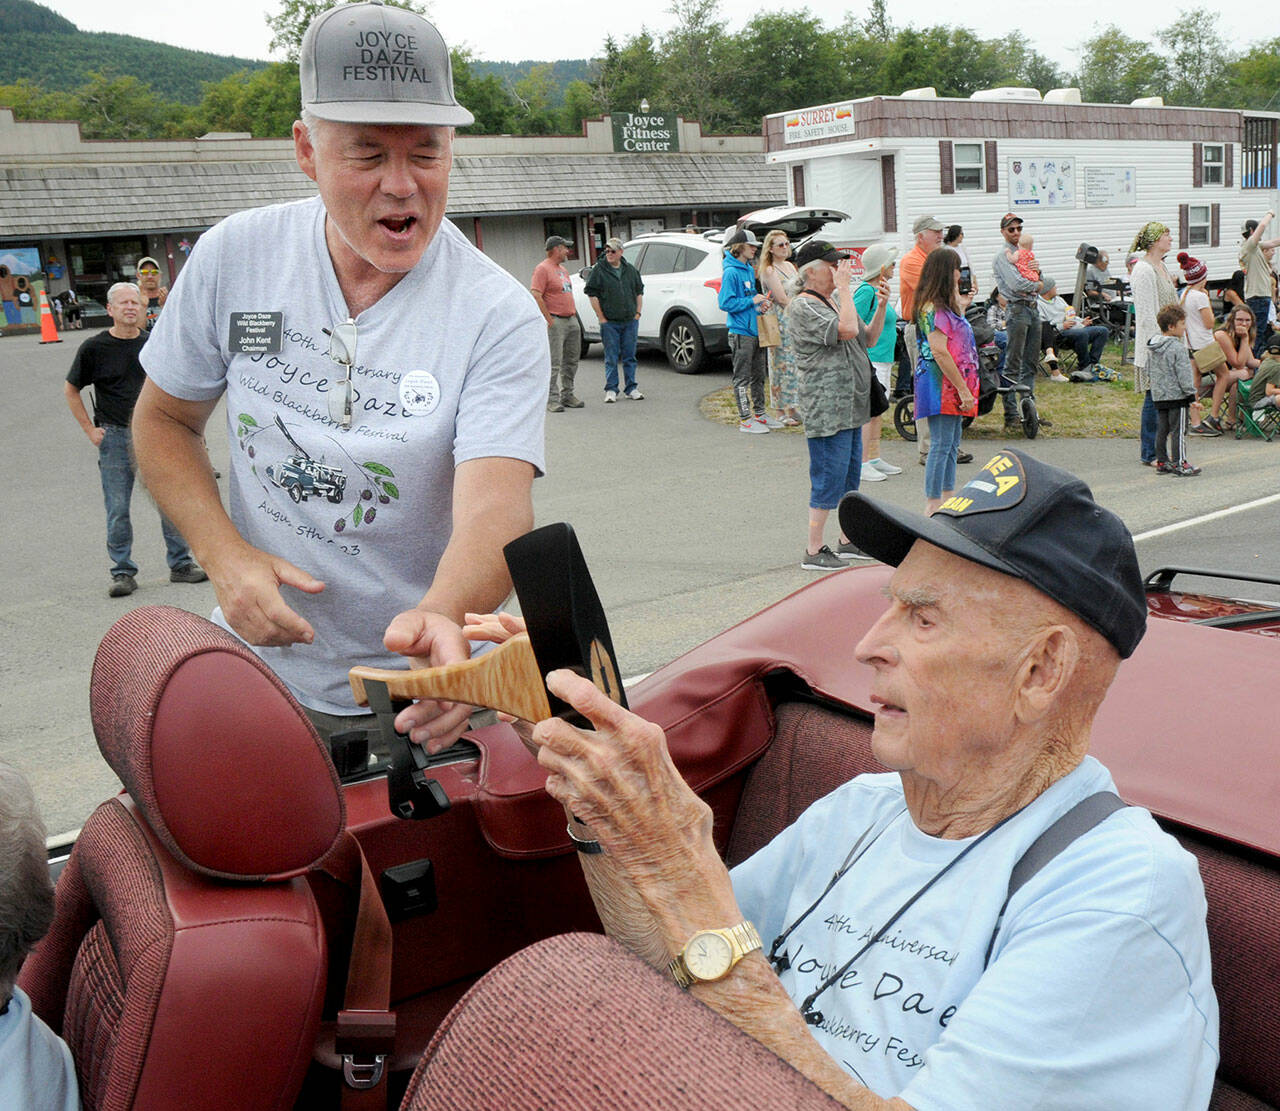 Lifelong Joyce resident and unofficial “mayor” John Singhose, 95, right, receives a key to the city fashioned from a hand ax from Joyce Daze Wild Blackberry Festival chairman John Kent during Saturday’s grand parade. (Keith Thorpe/Peninsula Daily News)